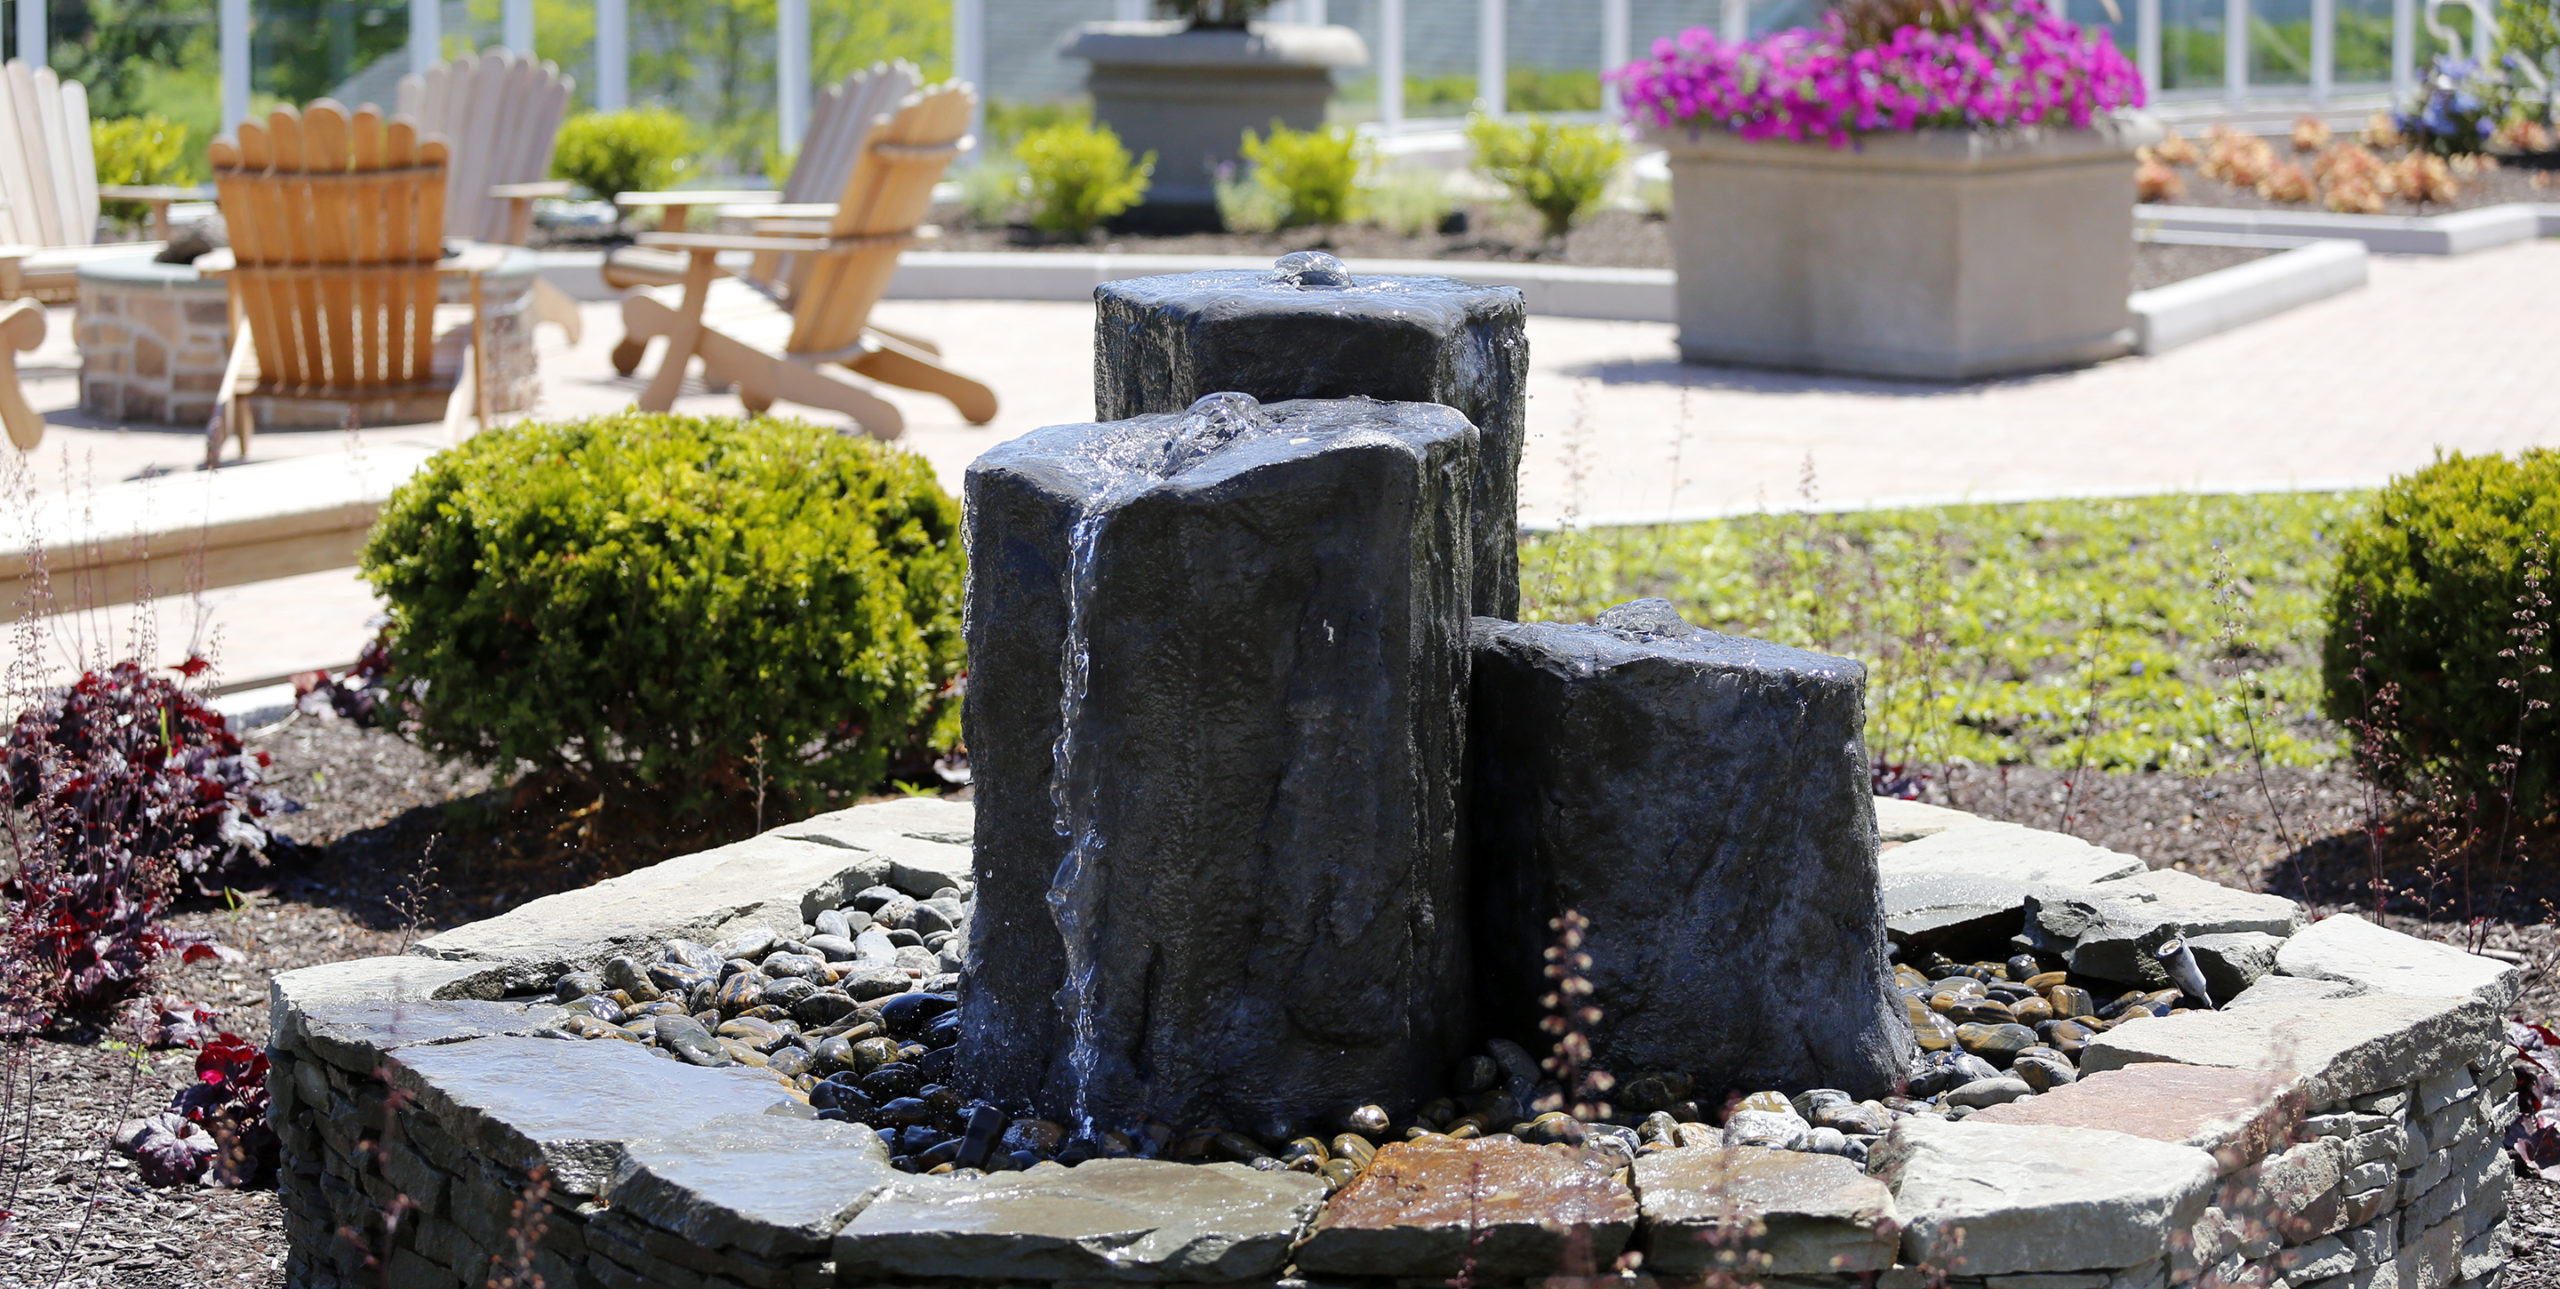 Fountain outside in the courtyard at The Shipyard at Port Jeff Harbor